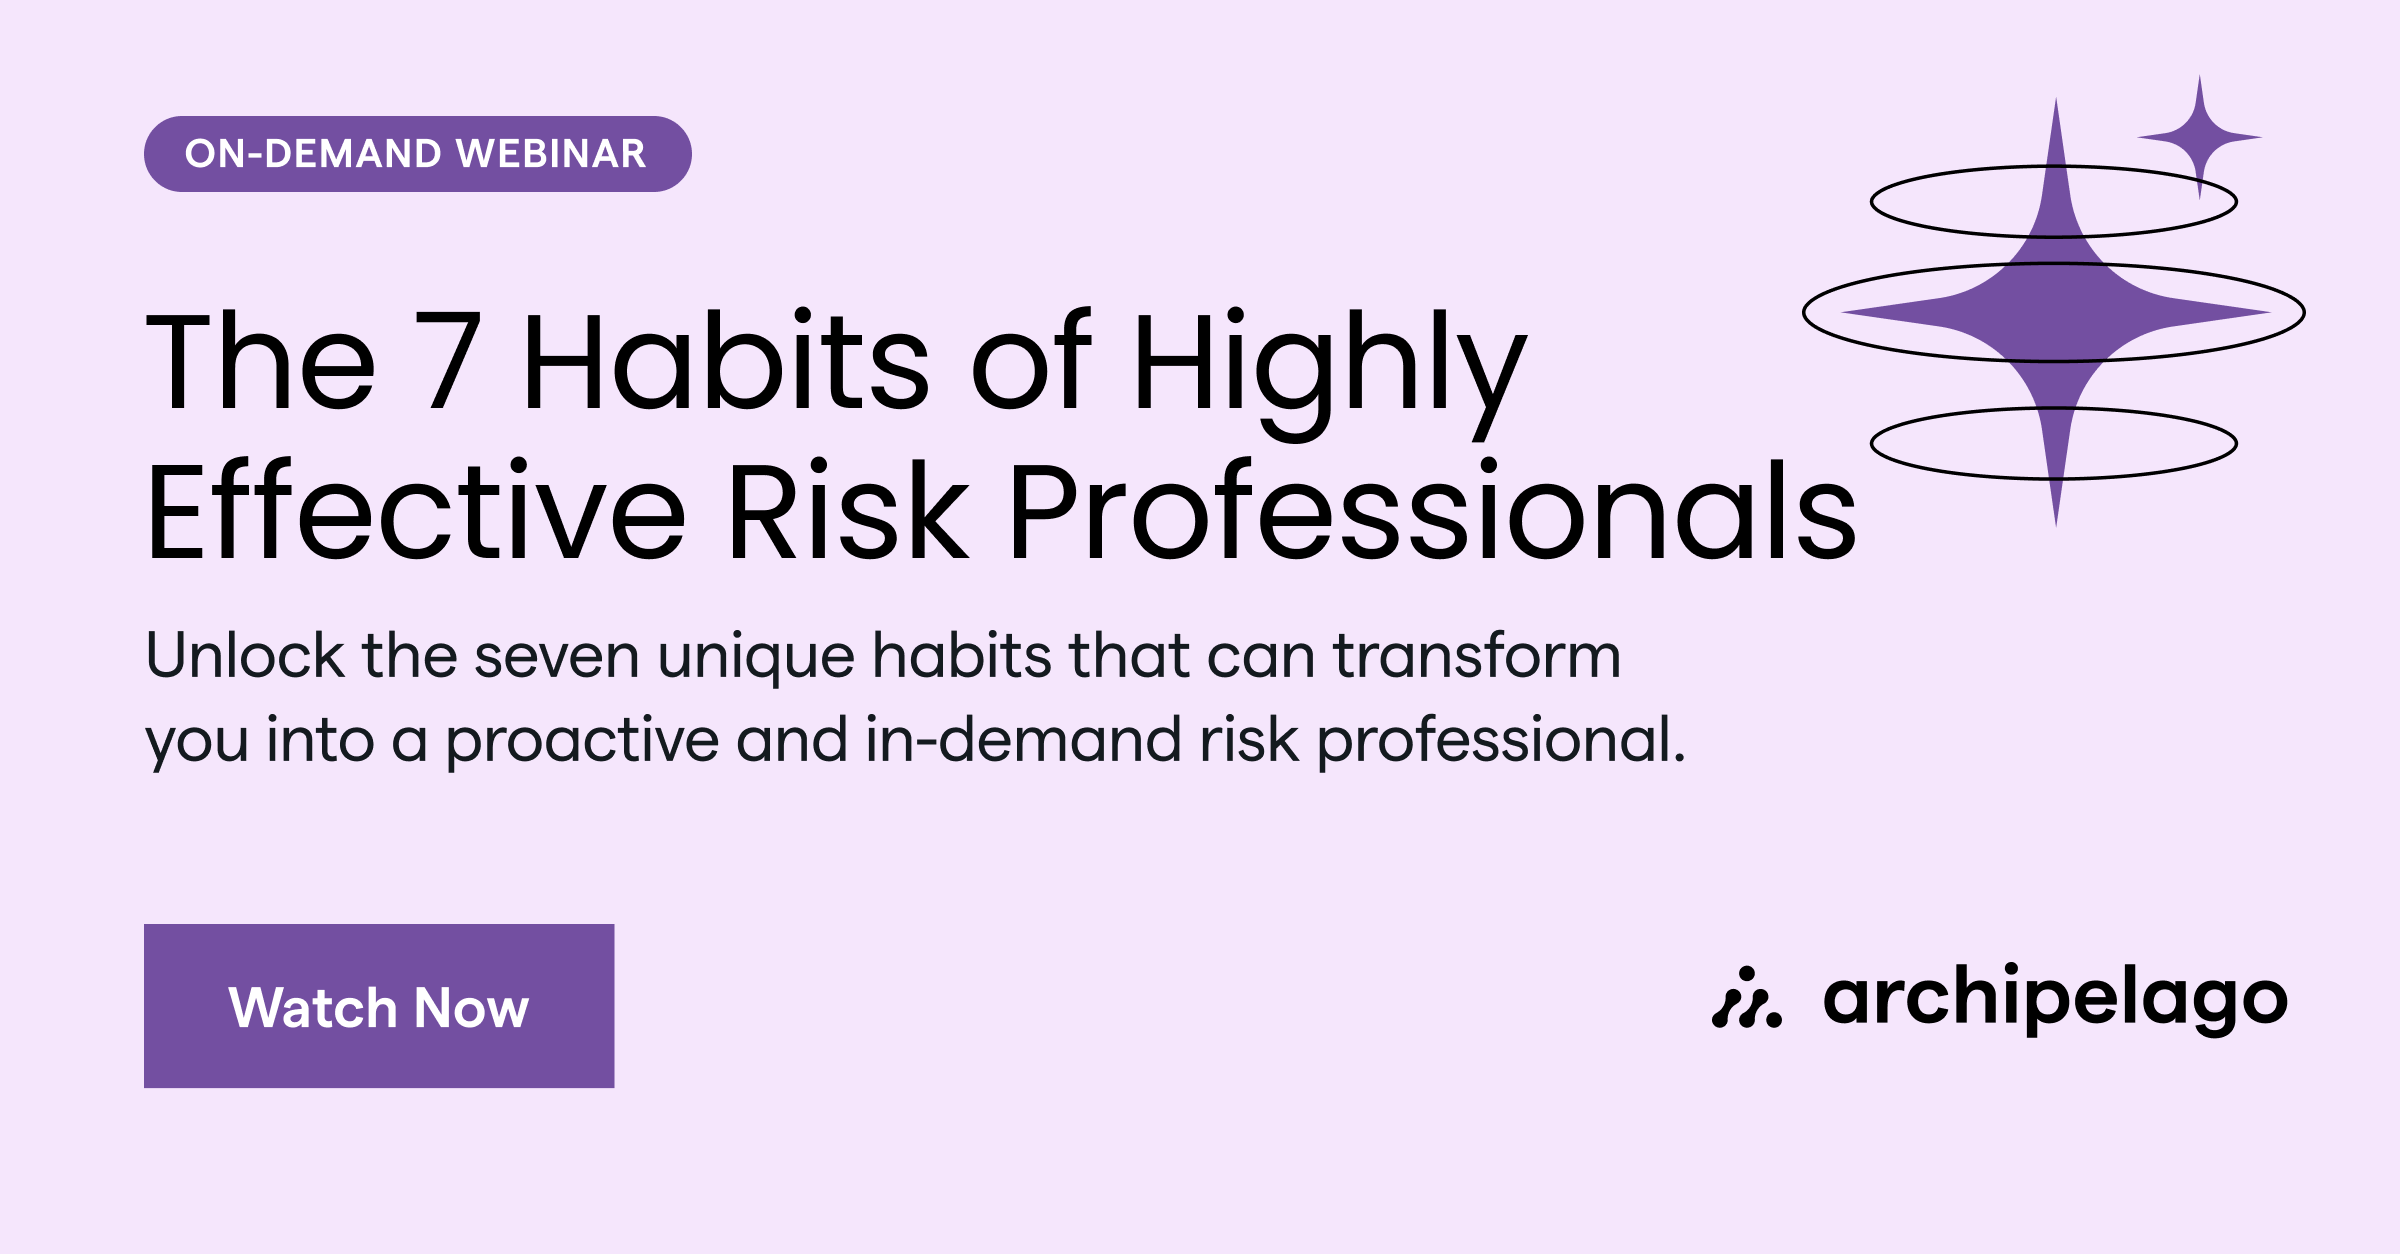 The 7 Habits of Highly Effective Risk Professionals Webinar cover image.